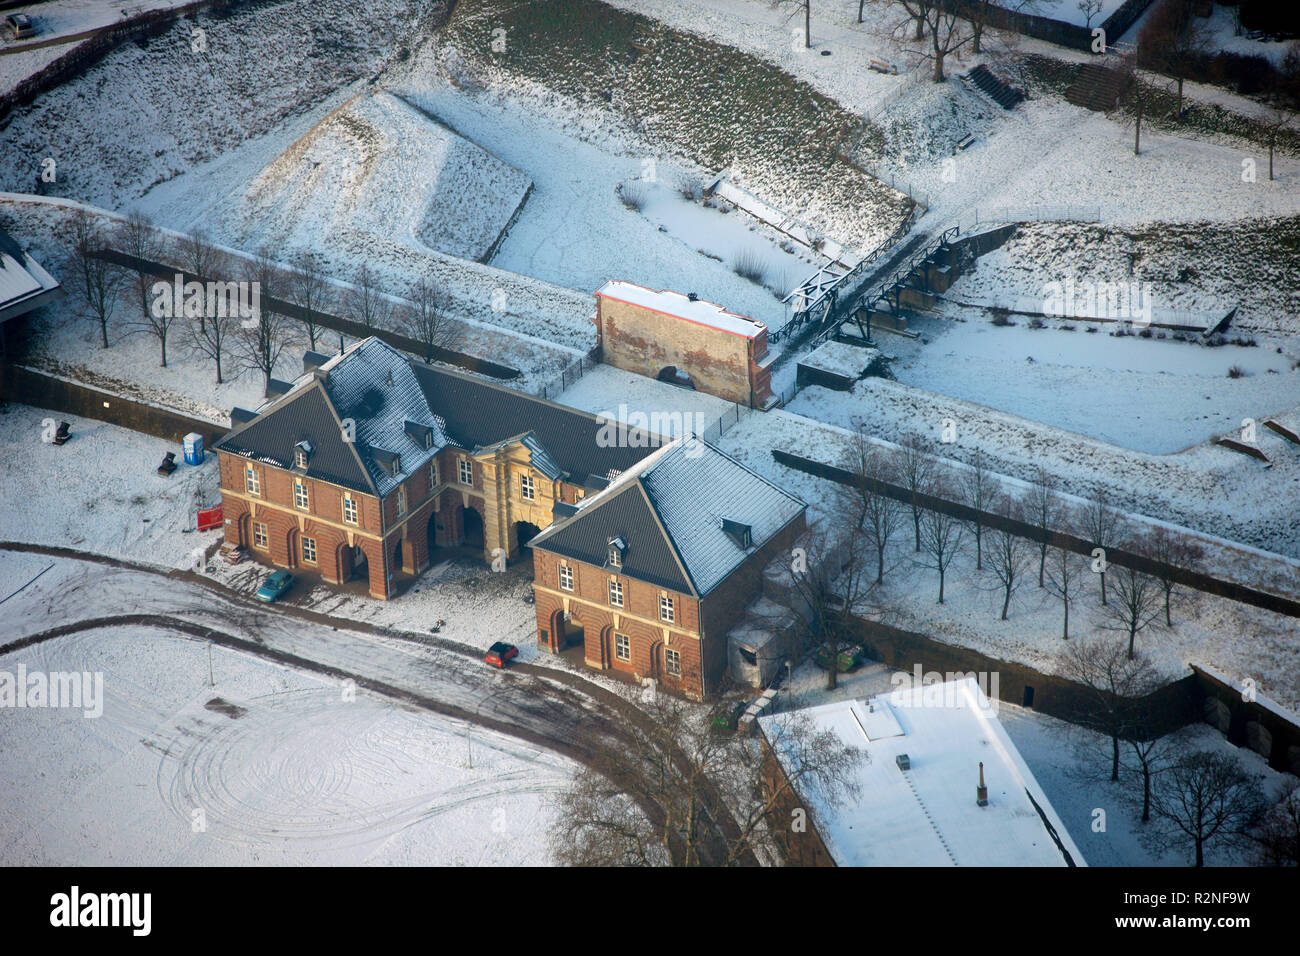 Aerial view, Citadel, Prussia Museum, Old Fort Blücher, named after general field marshal Blücher, Wesel, North Rhine-Westphalia, Germany, Europe, Stock Photo